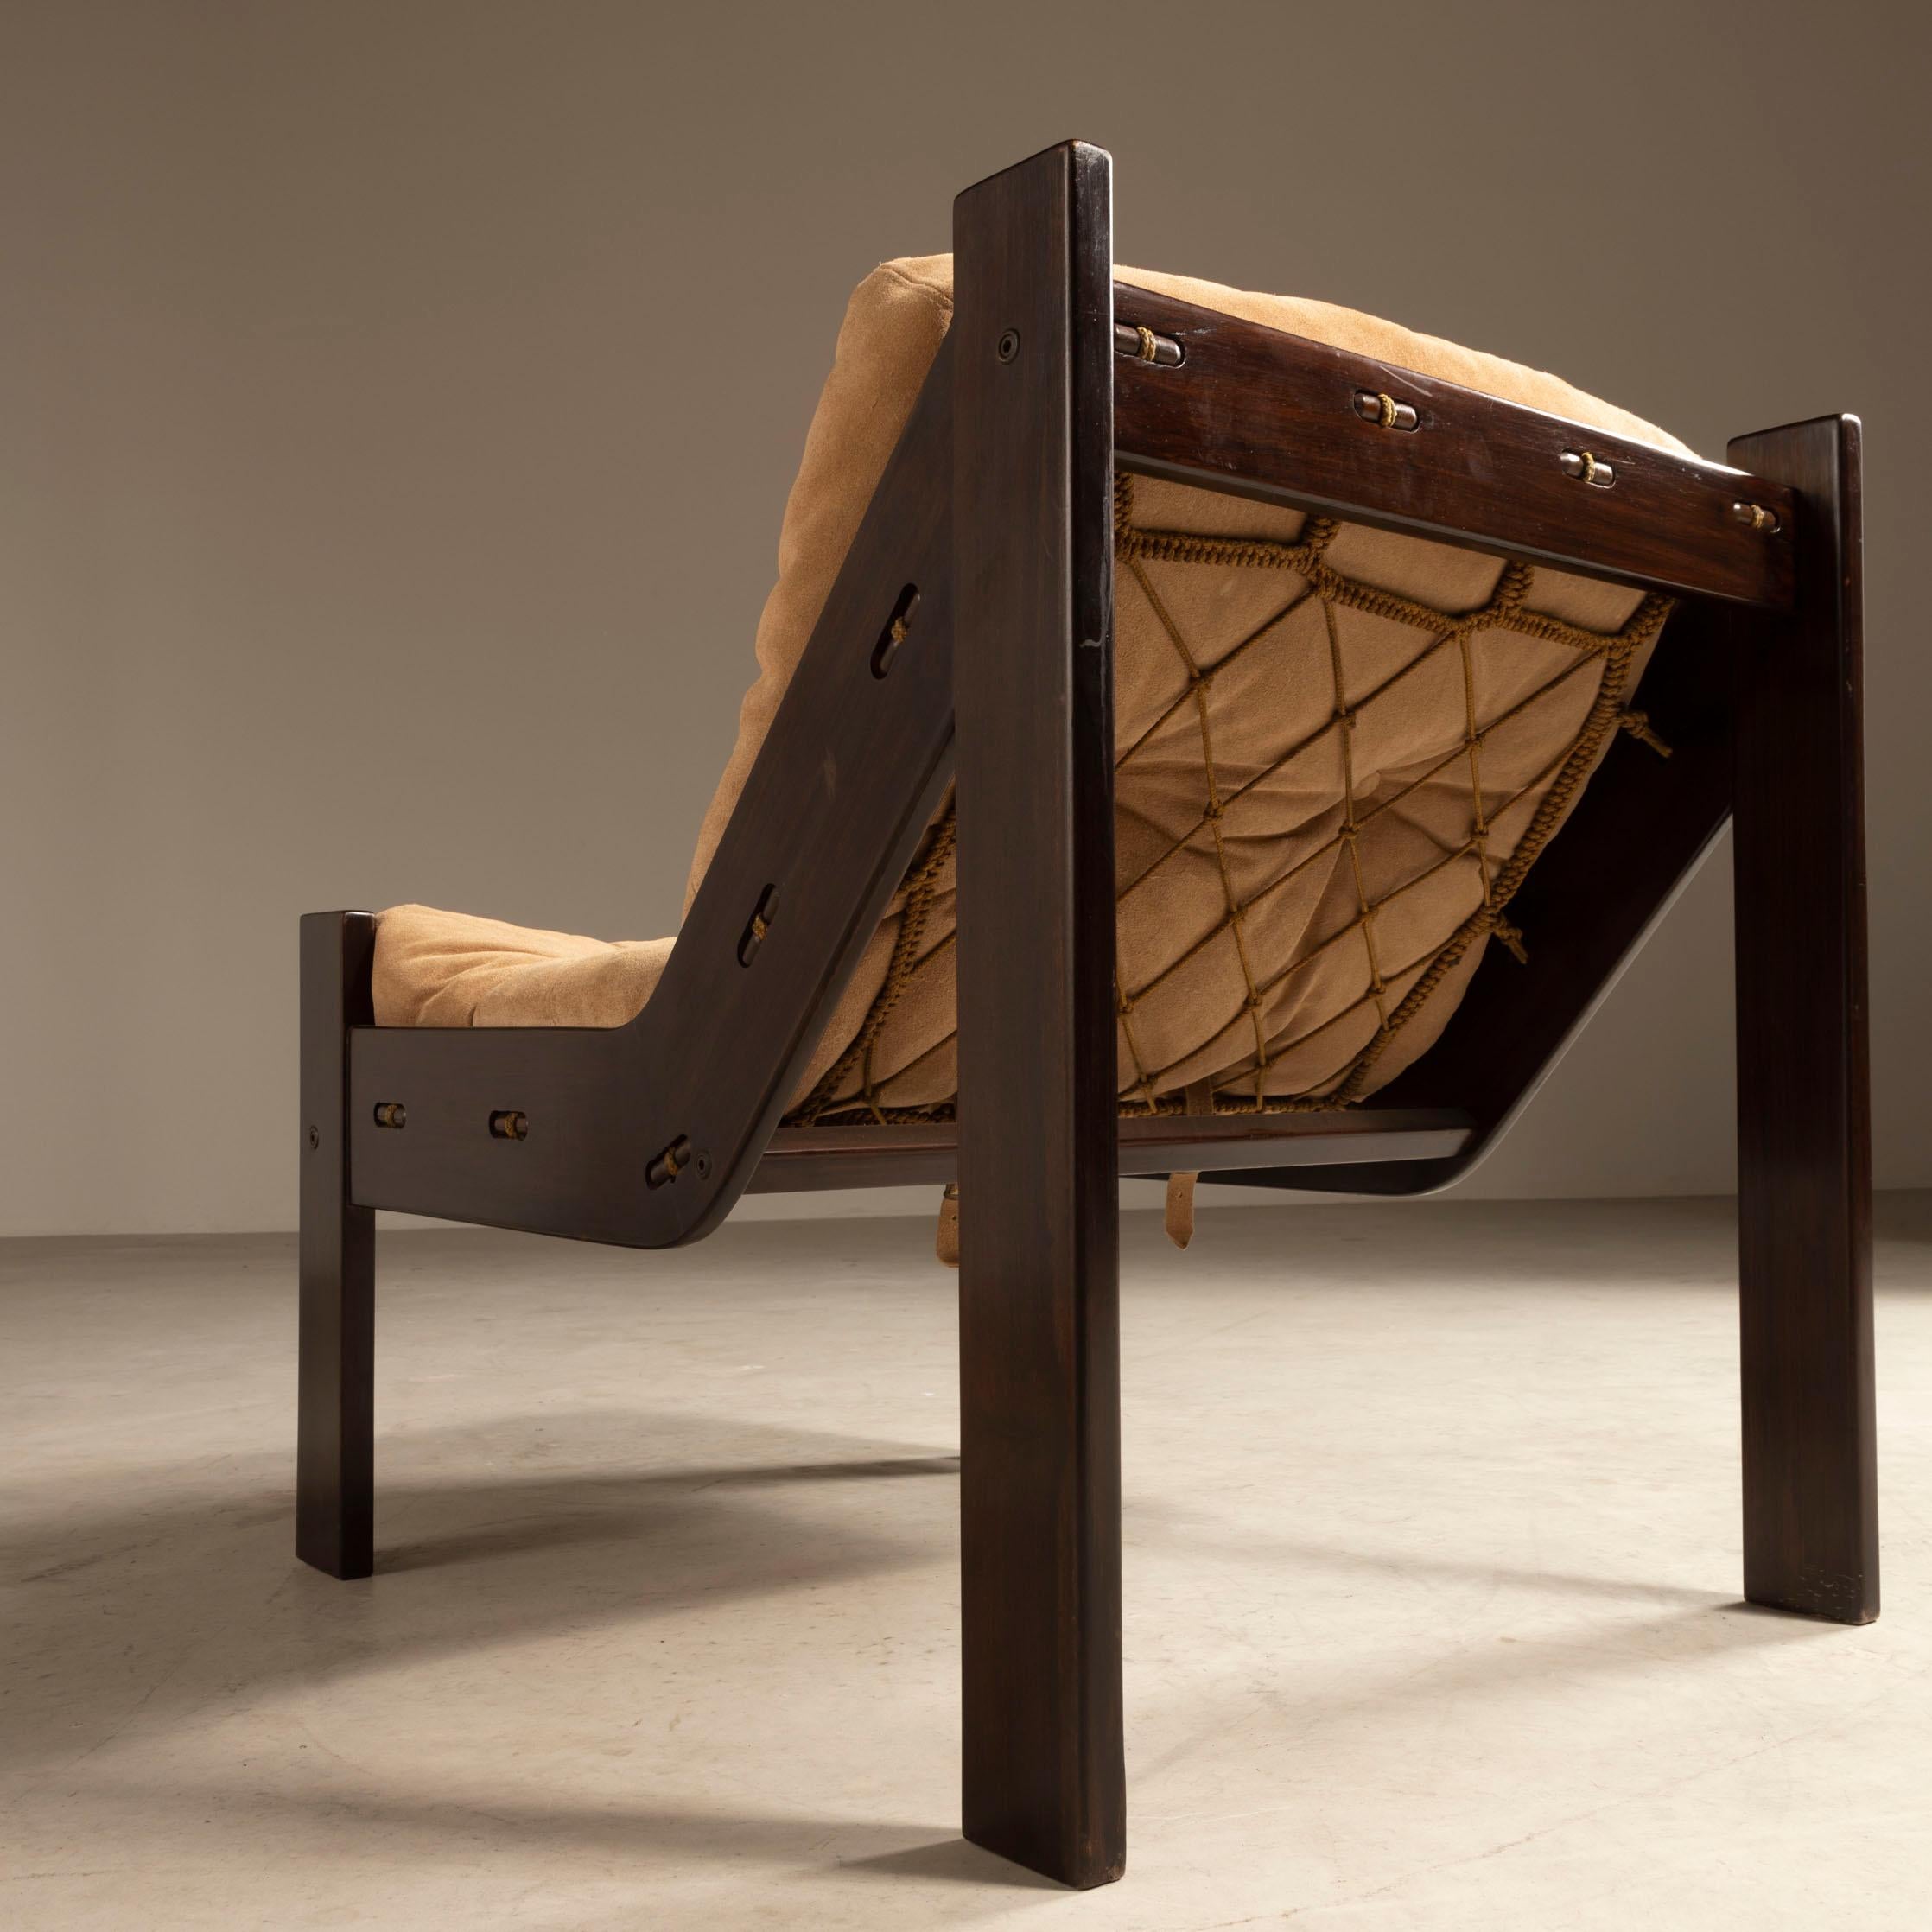 Wood Pair of Village Lounge Chair, by Jean Gillon, Brazilian Mid-Century Design